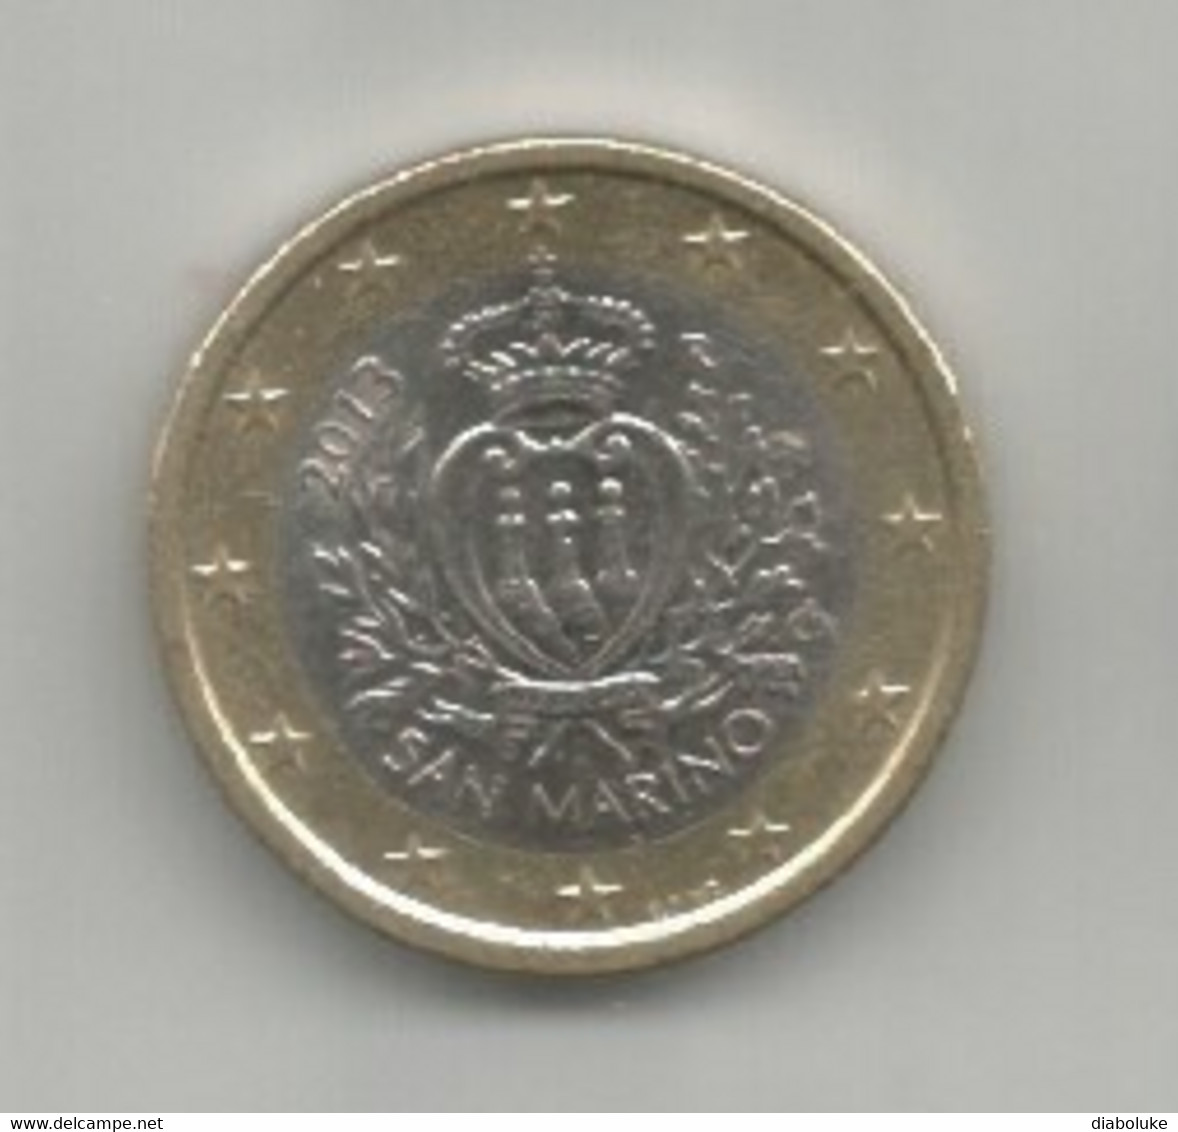 (CIRCULATED EUROCOINS) 2013, 1€ - Conditions As Shown In Picture - San Marino